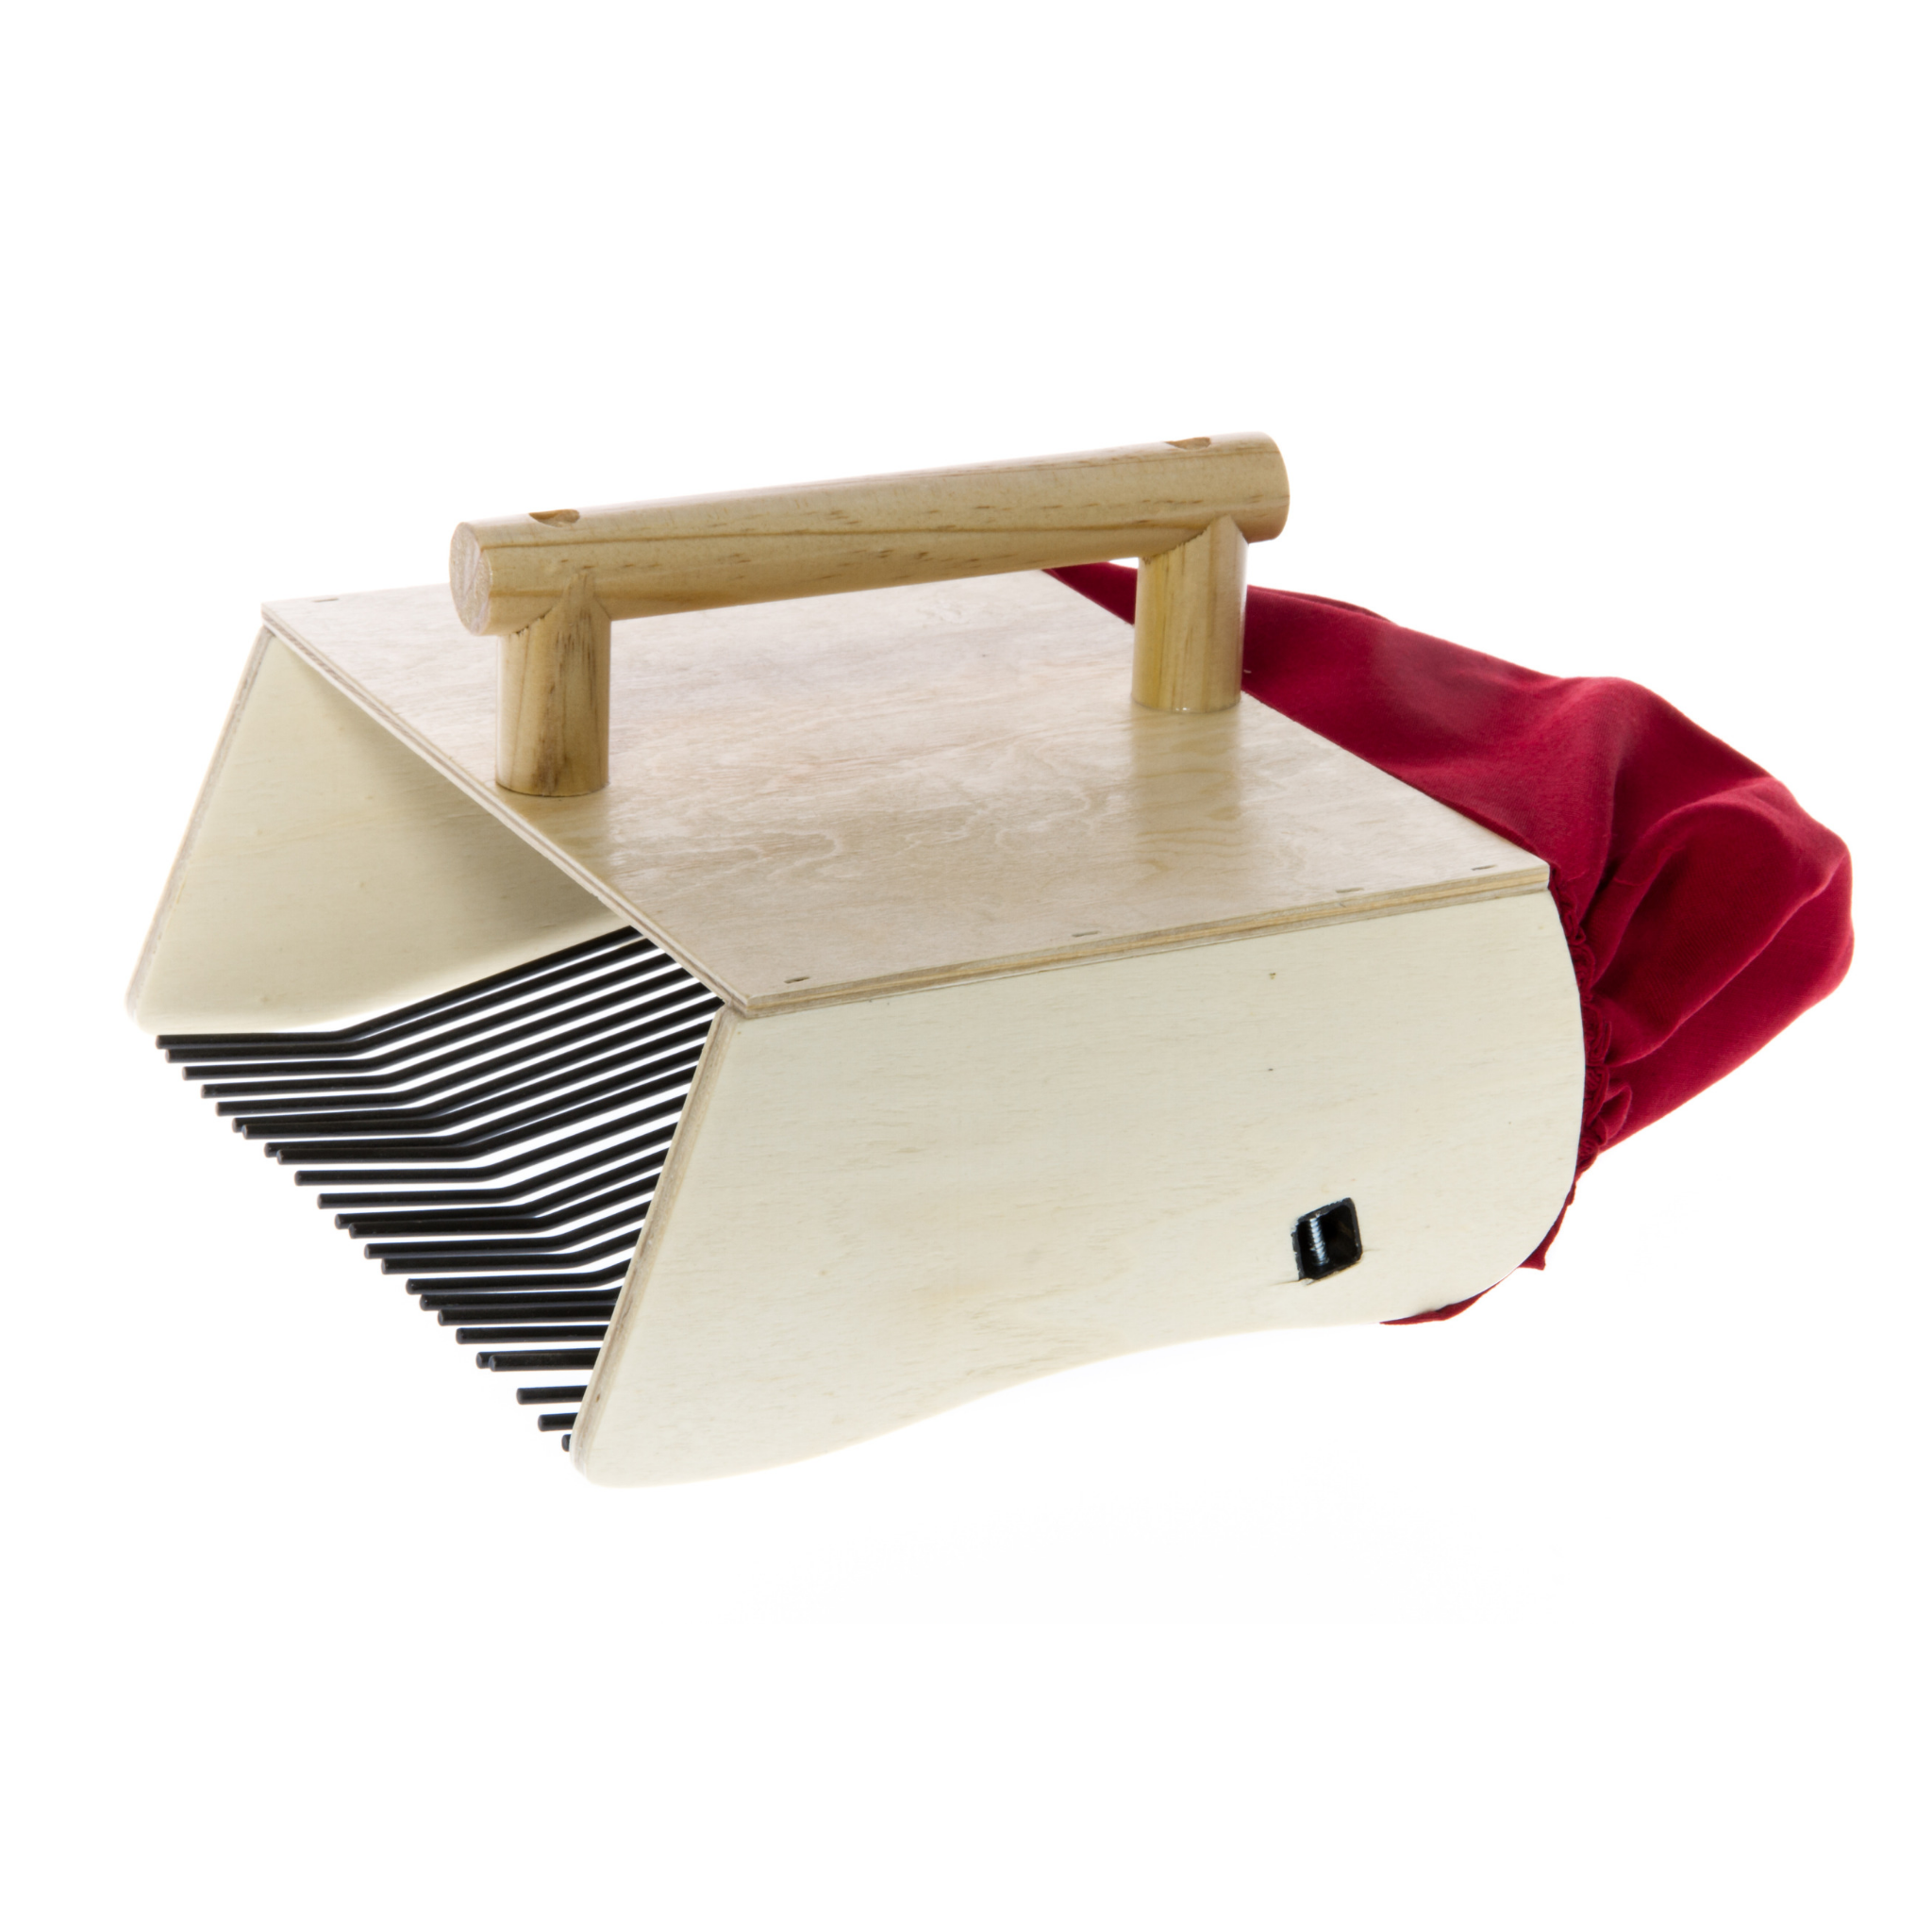 Wooden Berry Picker Pro with Metal Forks by Marjukka